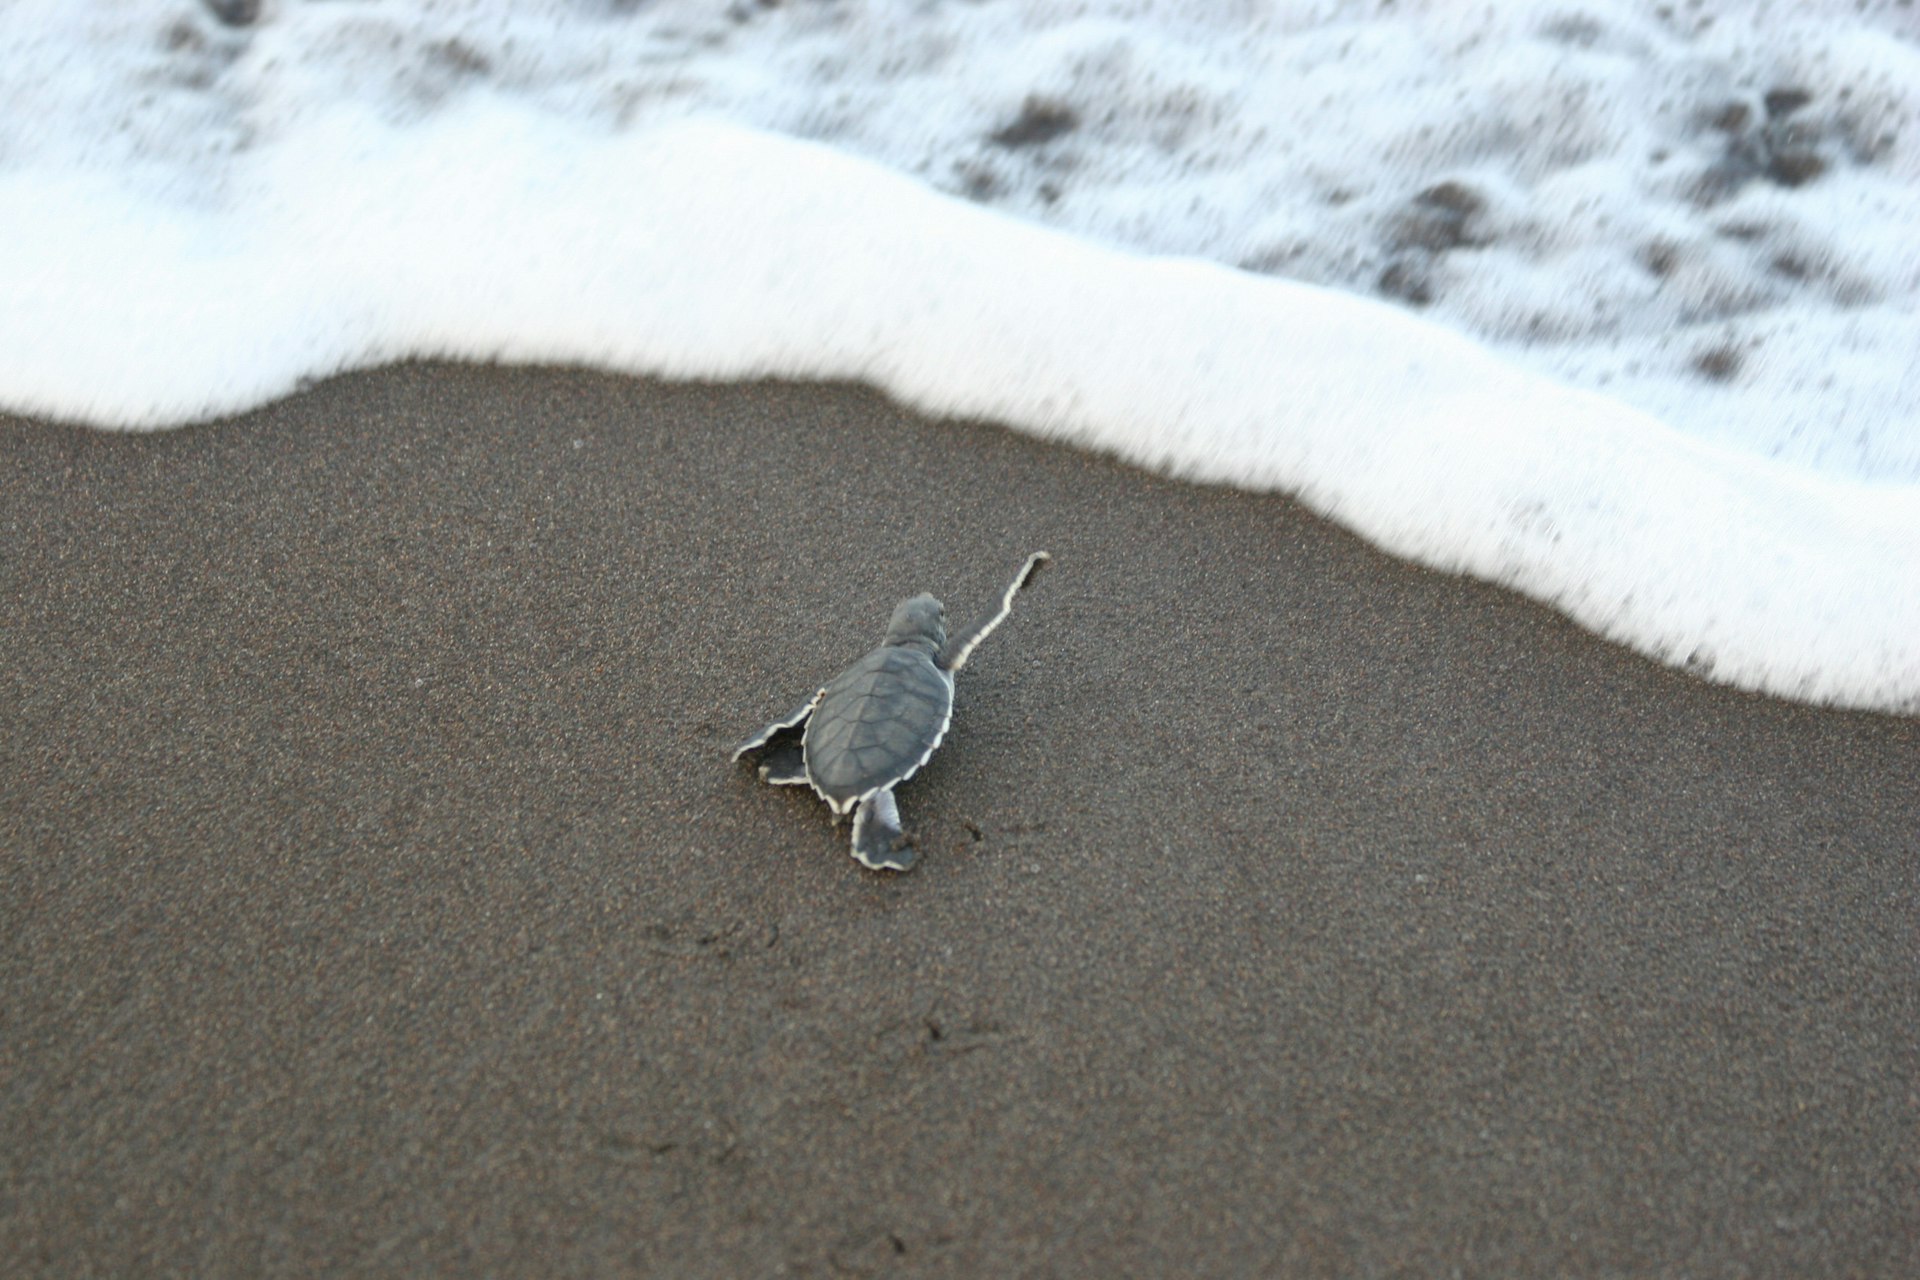 A newly hatched loggerhead turtle crossing the sand from the beach to the Caribbean Sea in Tortuguero National Park, Costa Rica